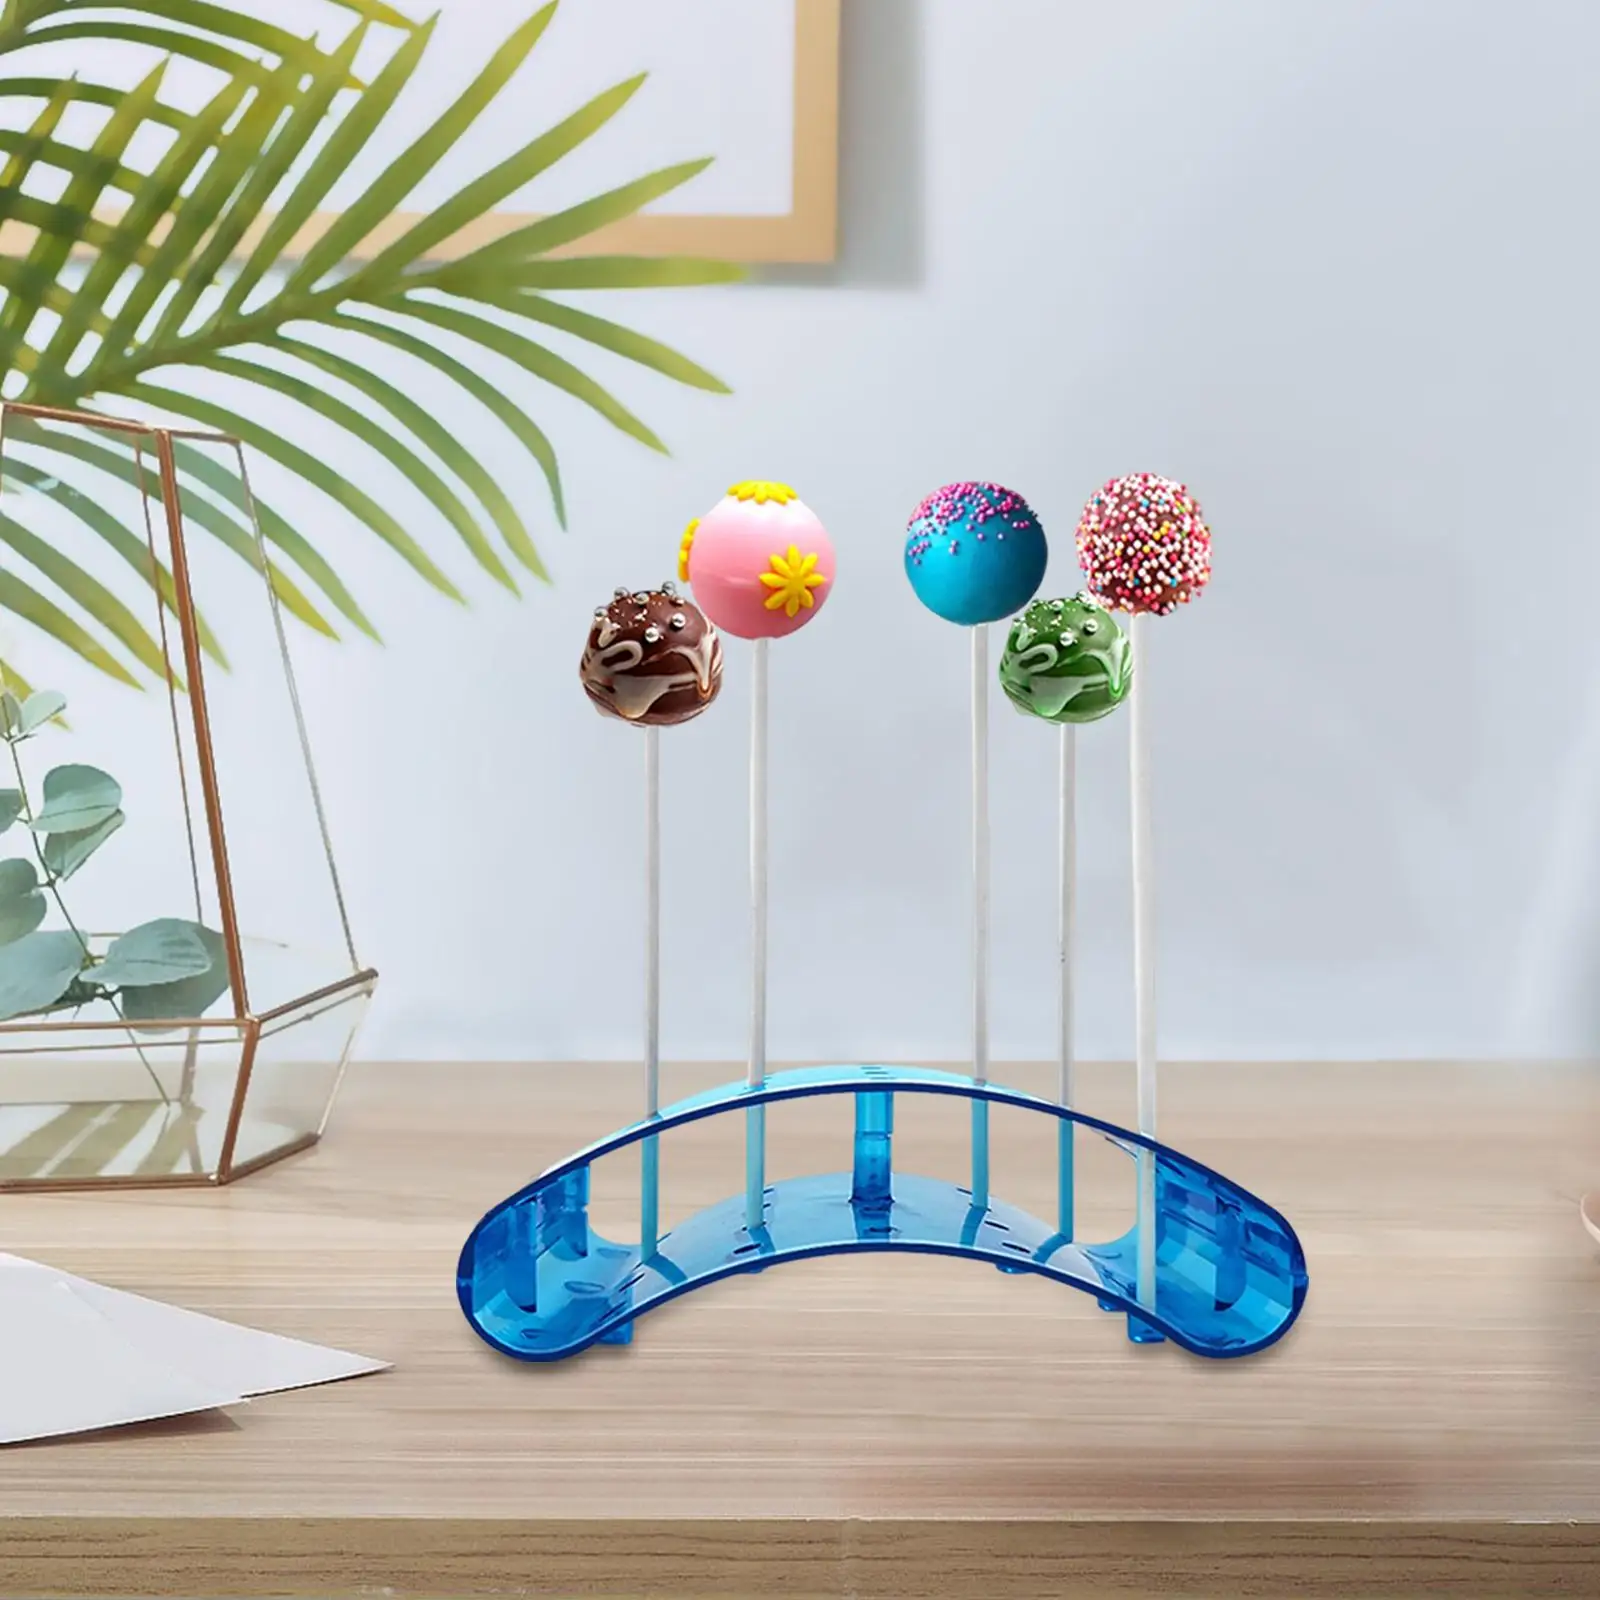 Acrylic Transparent Lollipop Display Stand 19/20 Holes Candy Rack Shelf DIY Bakeware Gadgets for Wedding Birthday Party Baking